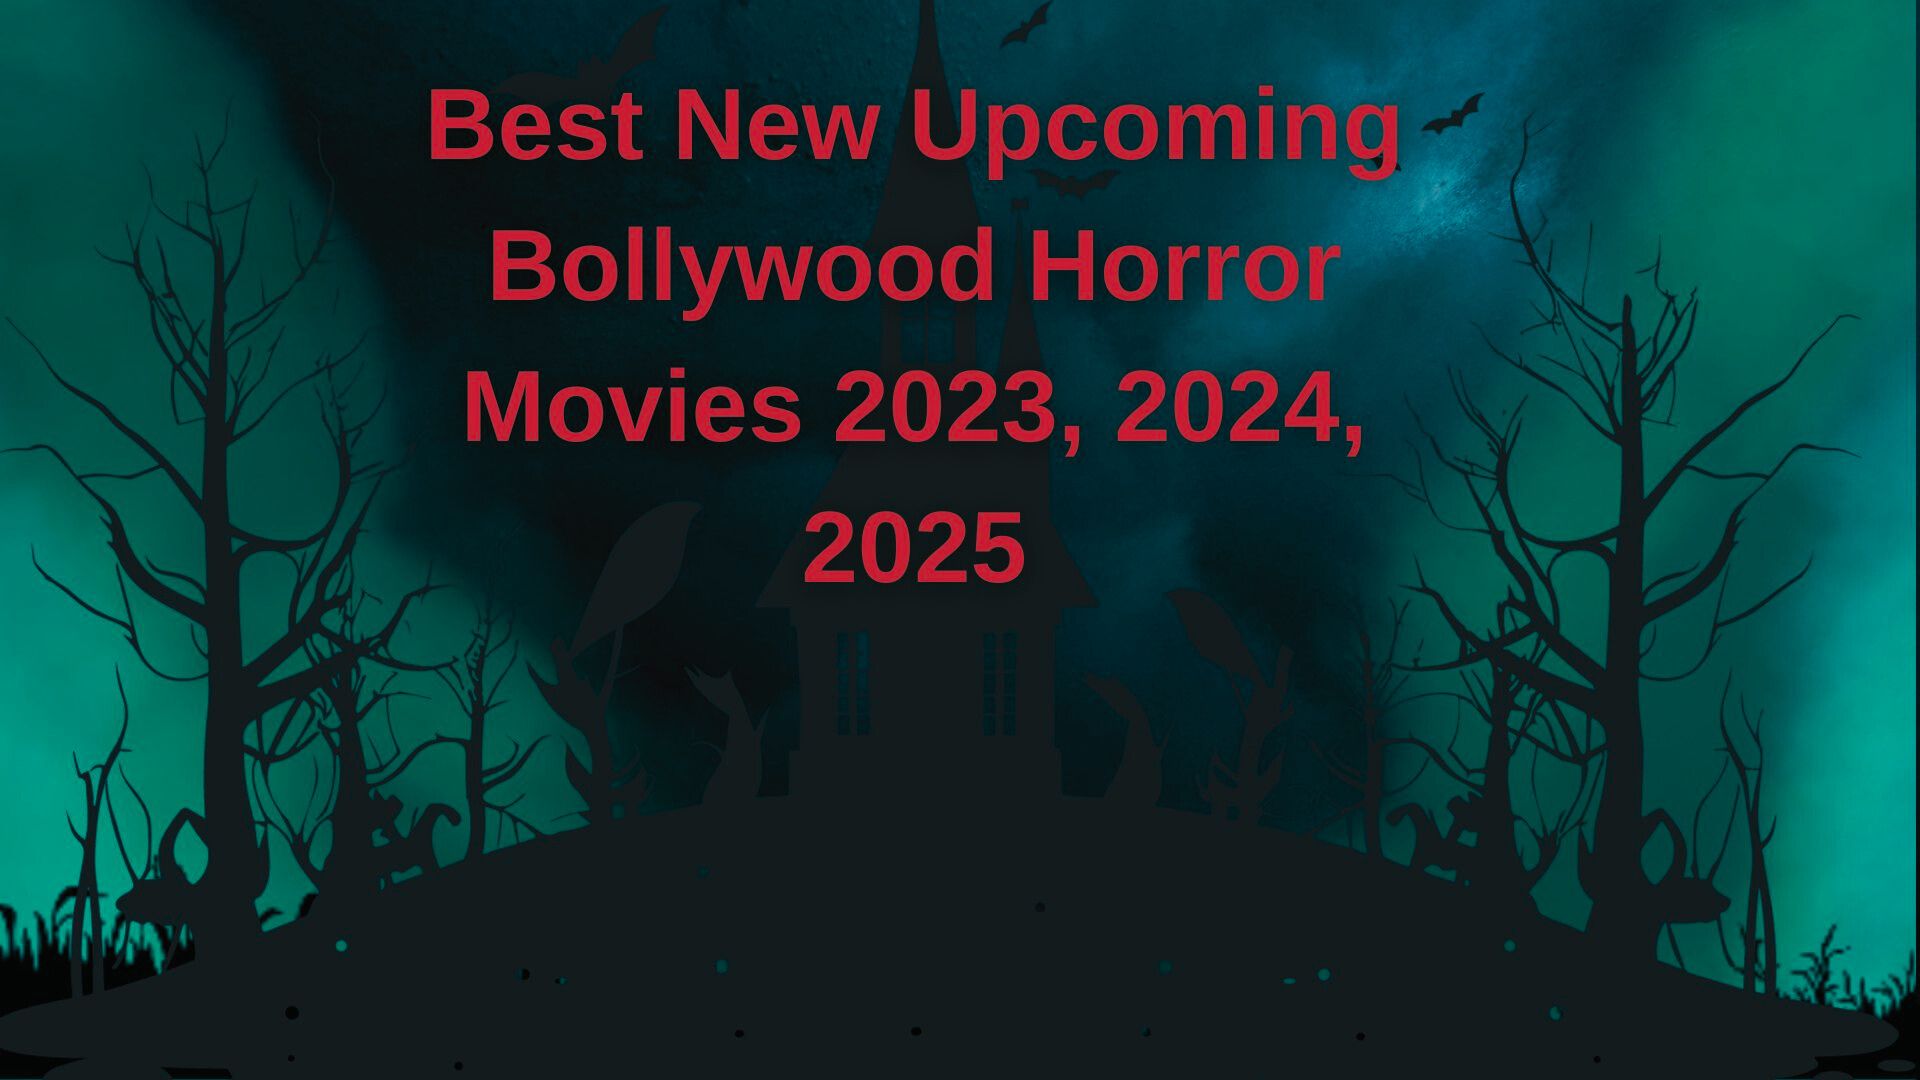 Best New Upcoming Bollywood Horror Movies 2023, 2024, 2025